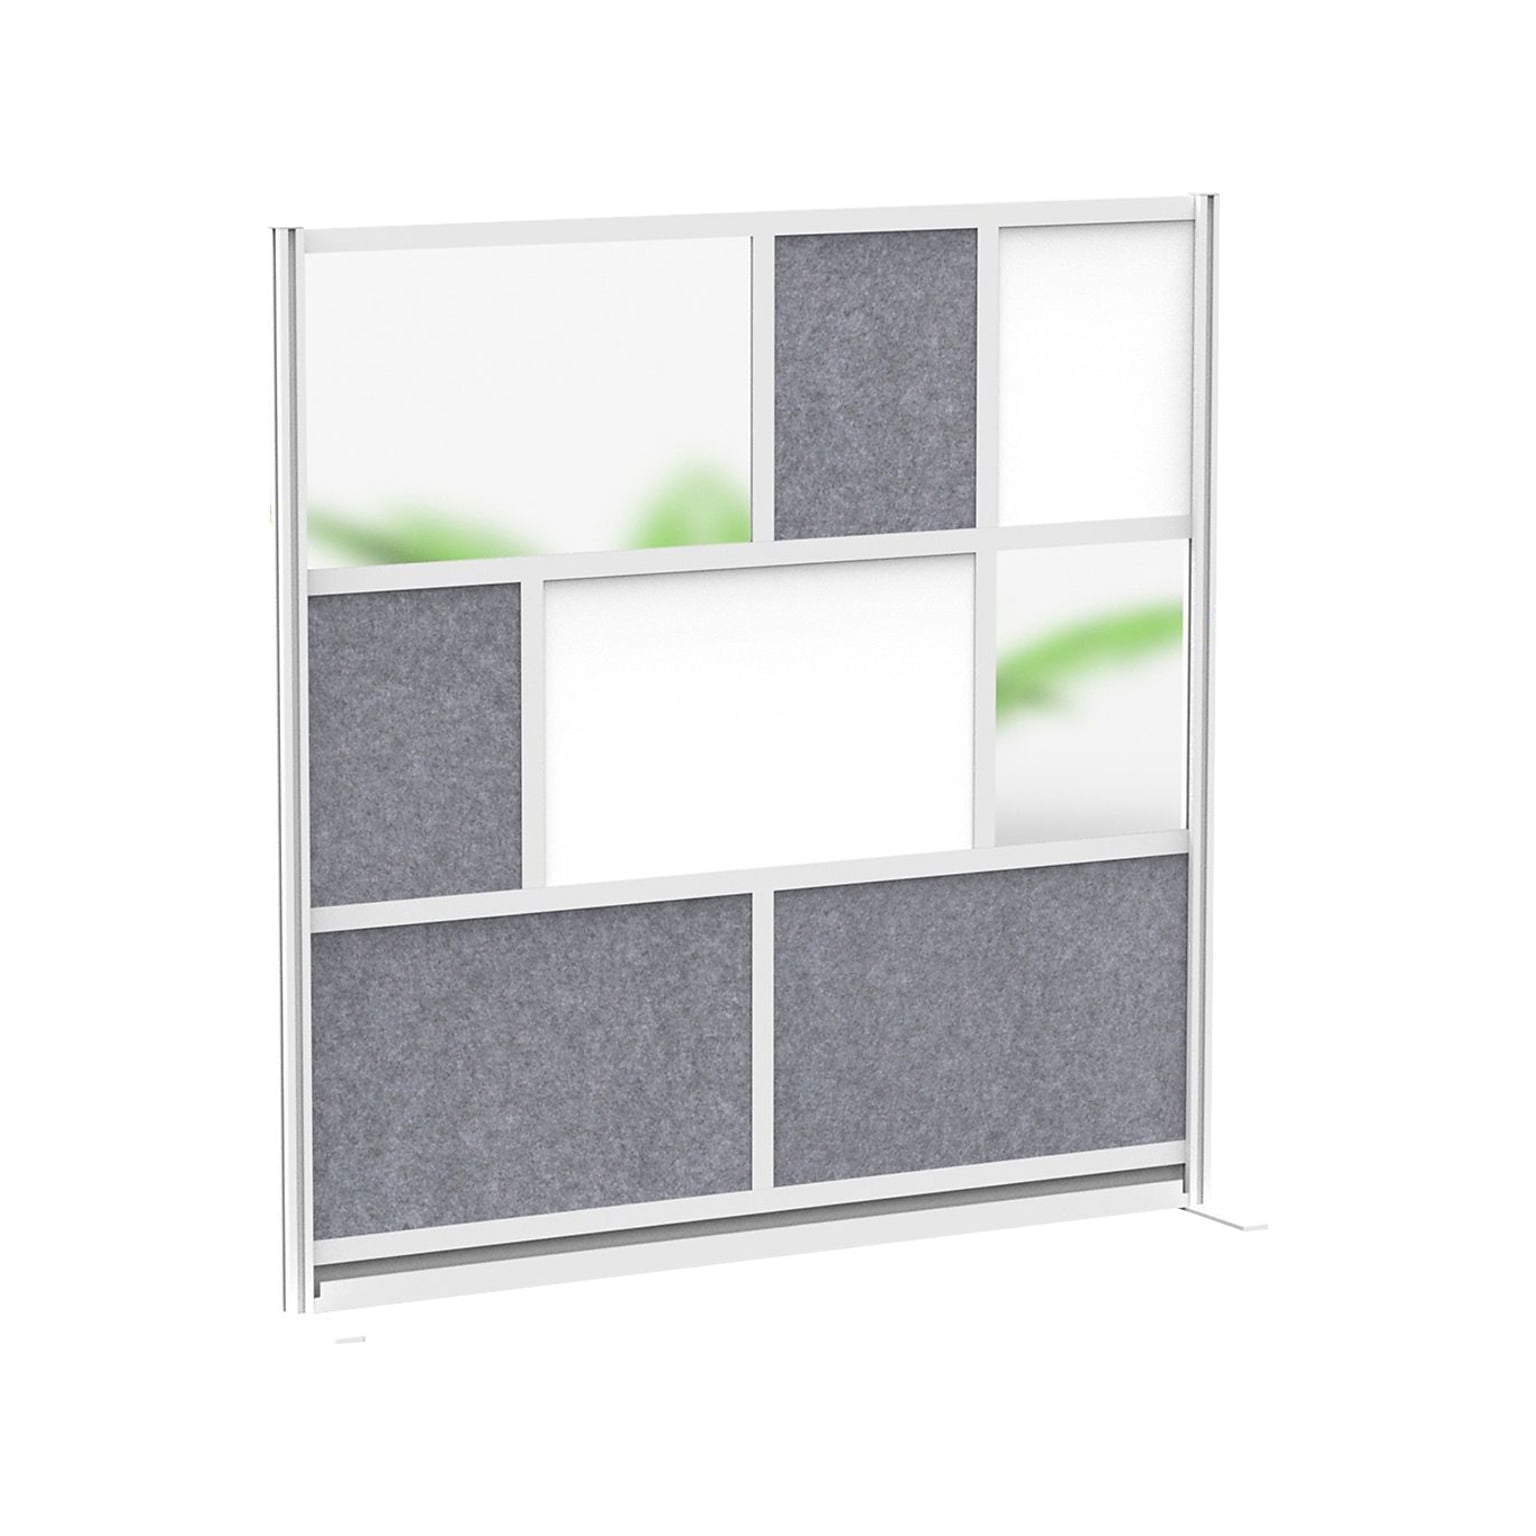 Luxor Workflow Series 8-Panel Freestanding Modular Room Divider System Starter Wall with Whiteboard, 70H x 70W, Gray/Silver